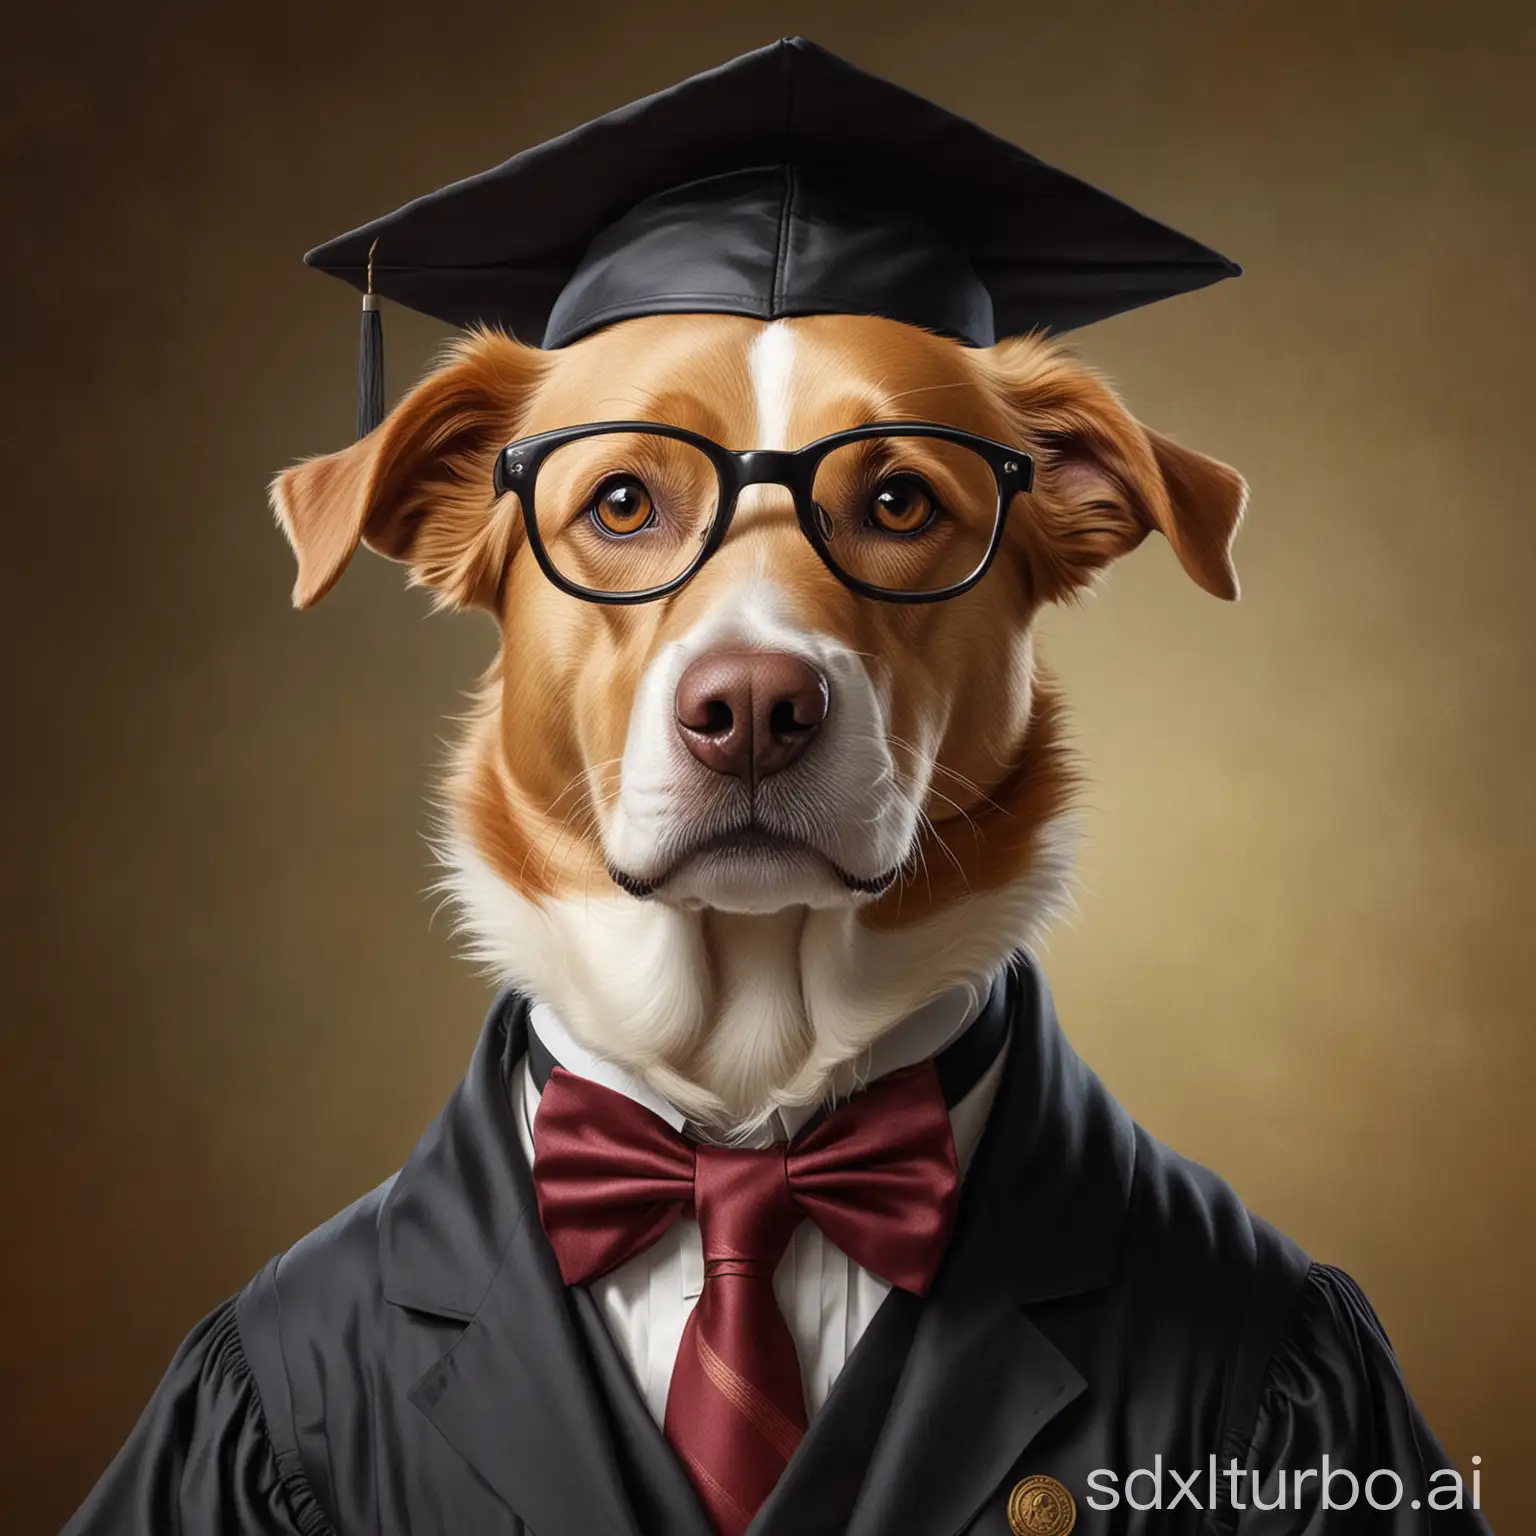 Realistic-Portrait-of-Professor-Dog-with-Academic-Dignity